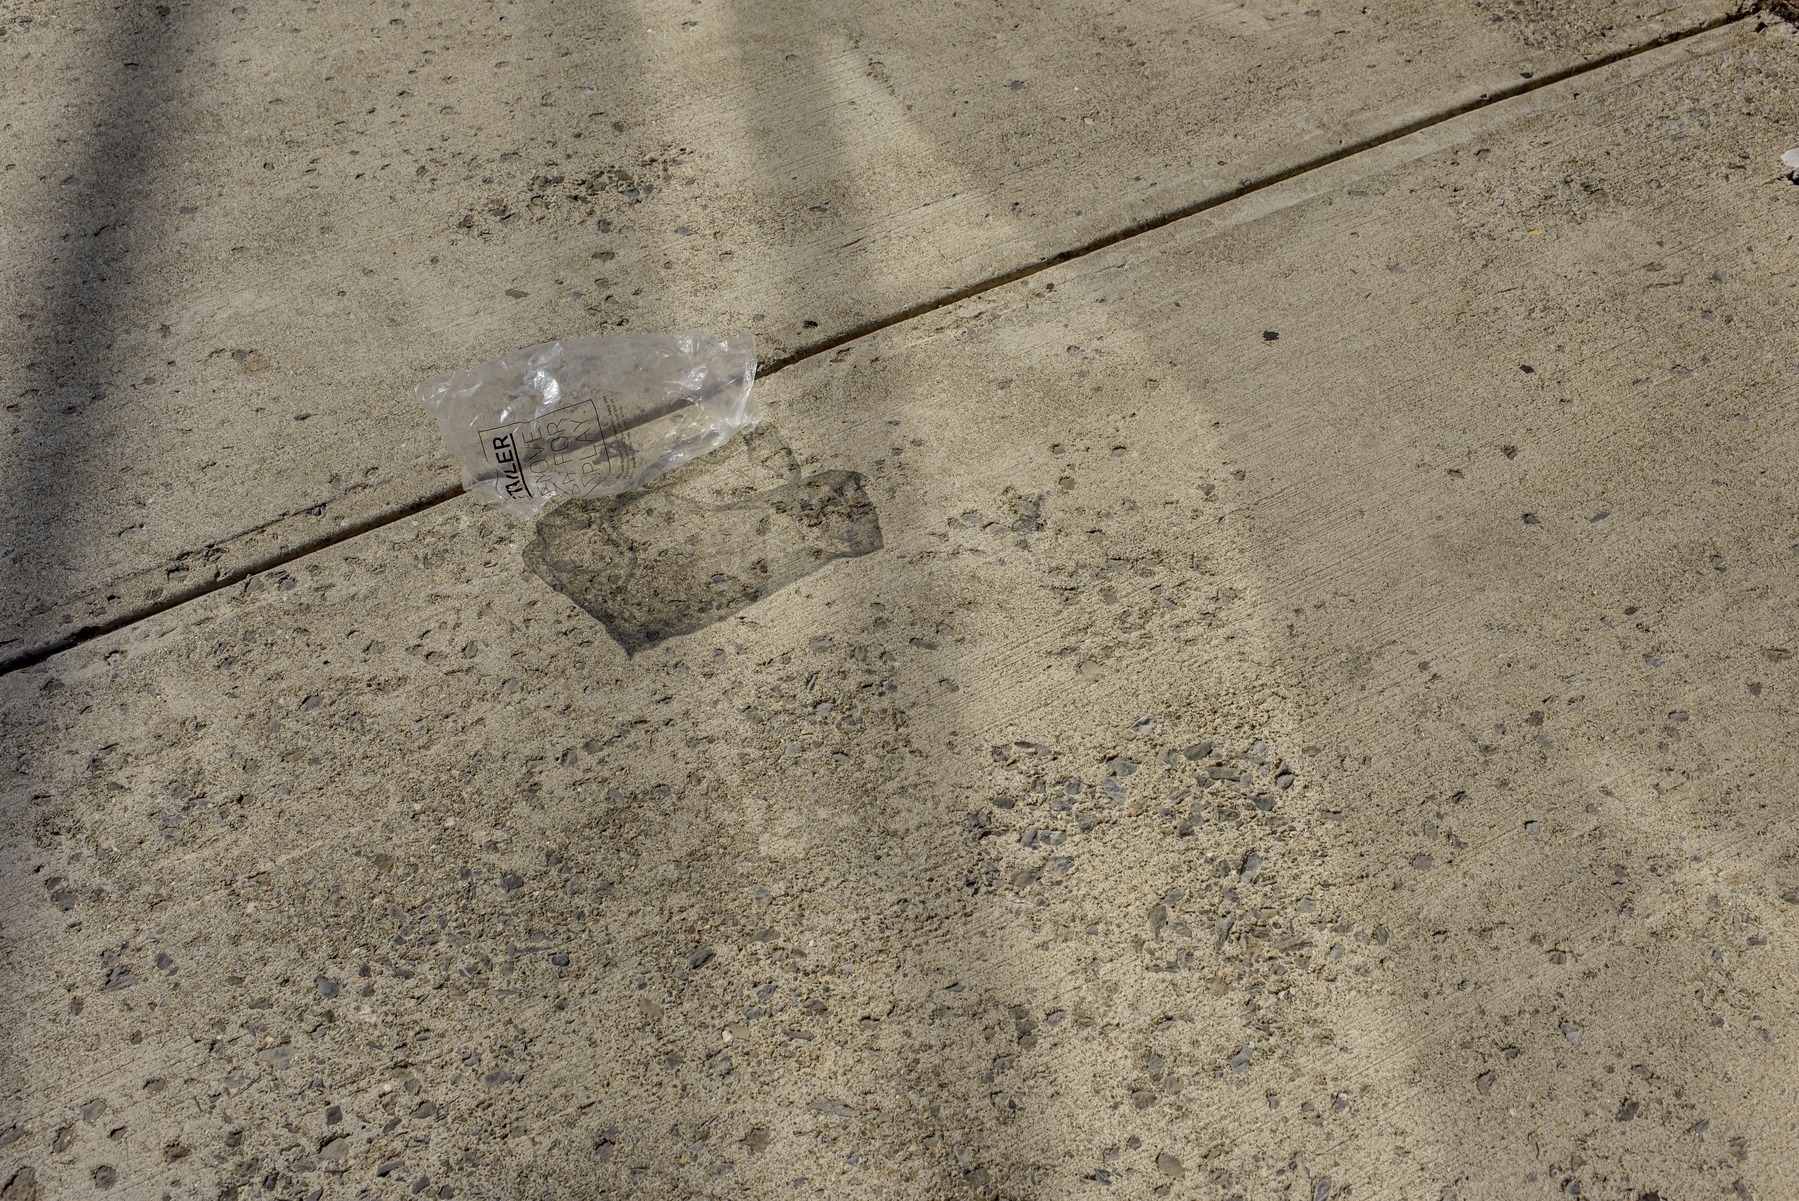 Plastic bag on concrete sidewalk in early morning sun. Complex shadow pattern cat by the bag. Bag being blown around.